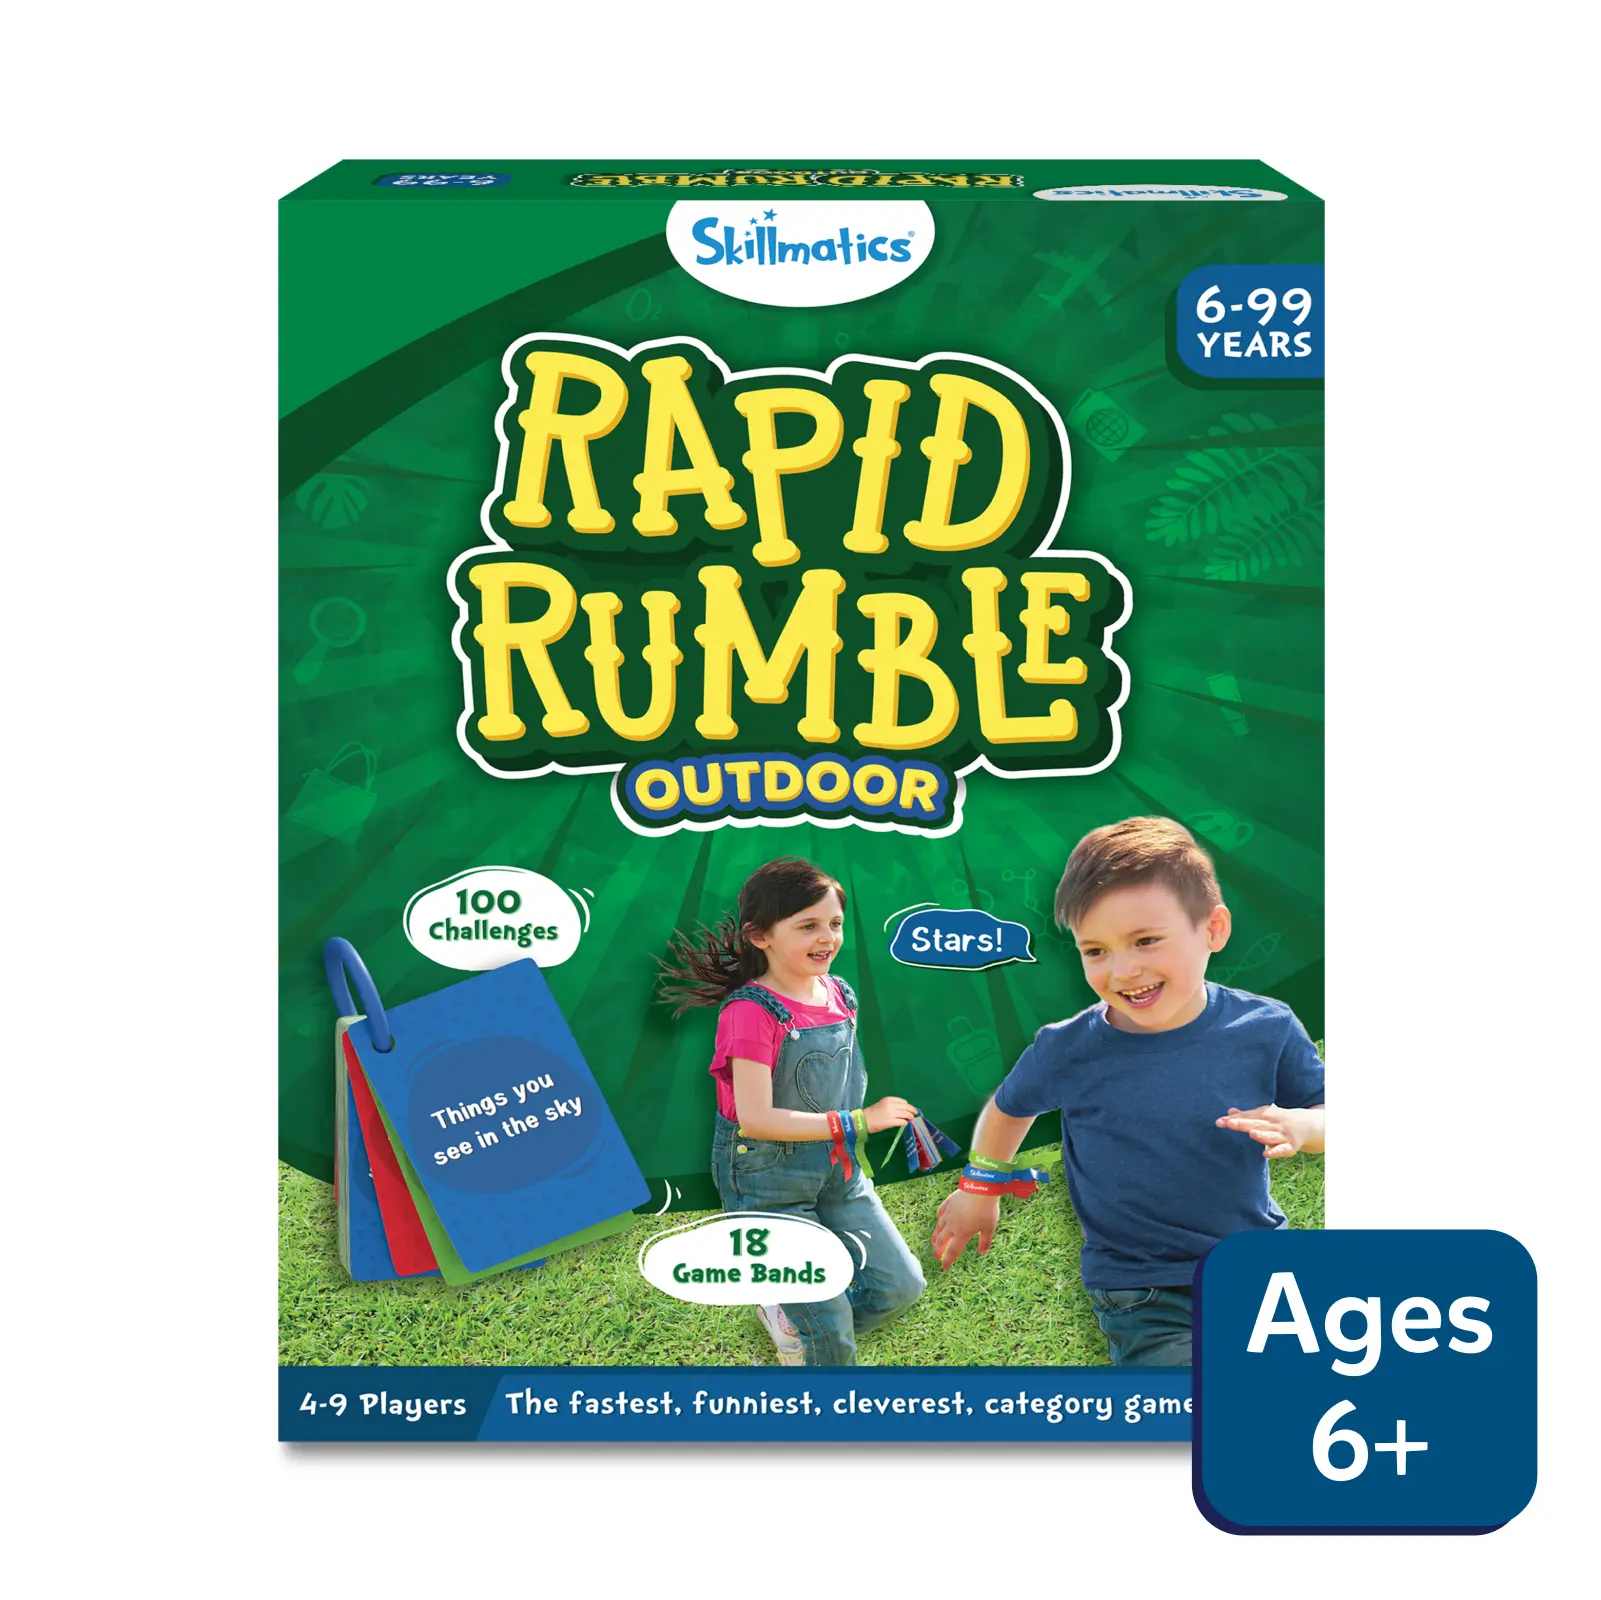 Rapid Rumble Outdoor  Educational & Clever Category Game of Tag (ages –  Skillmatics